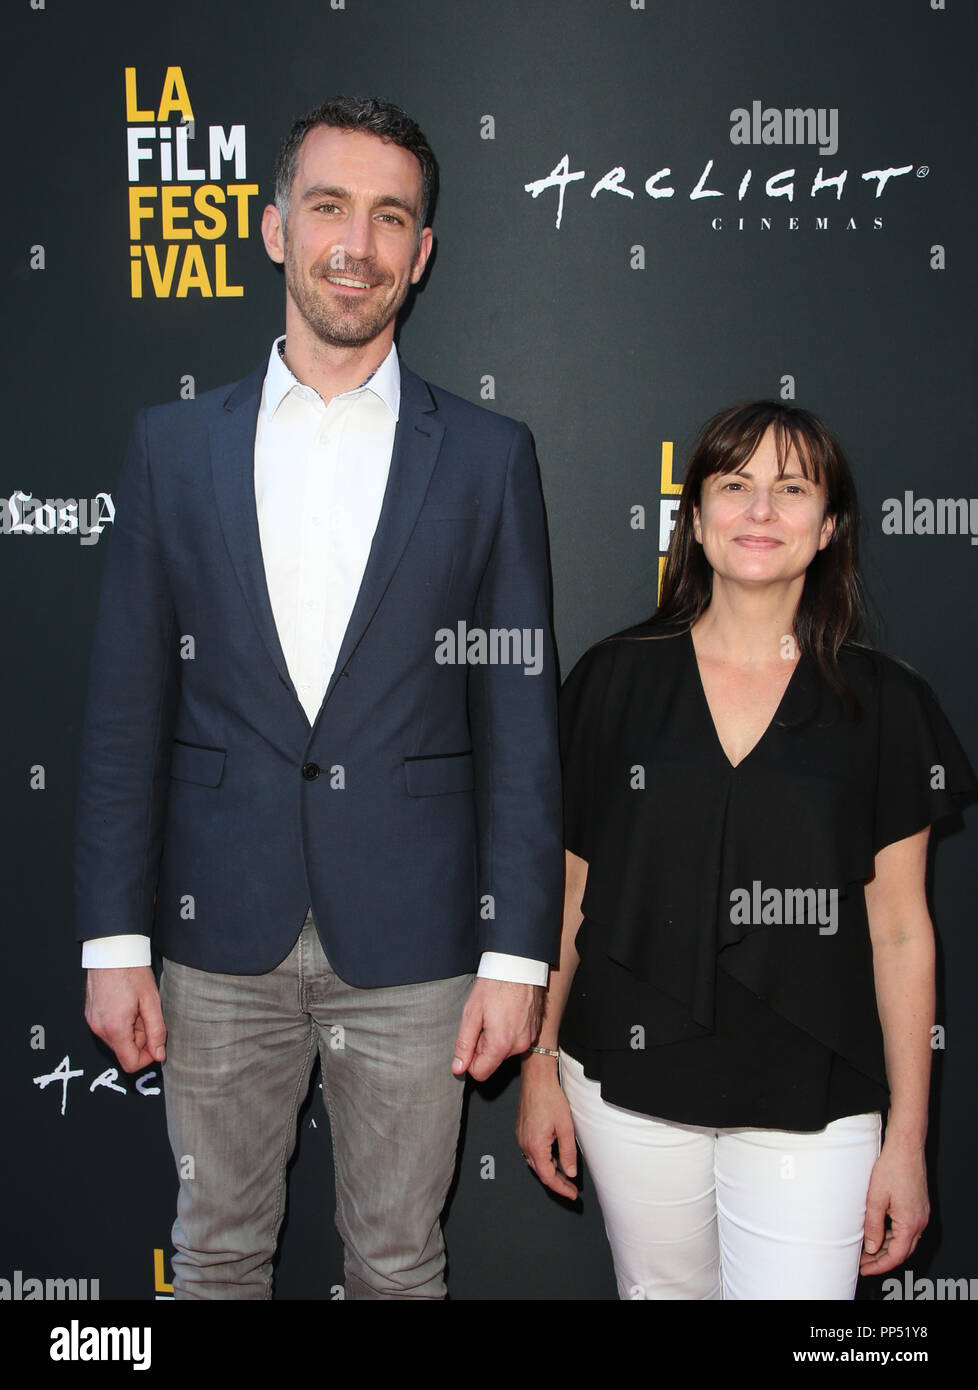 California, USA. 22nd Sep, 2018. Nada Cirjanic, Matt Stevens, at the 2018 Los Angeles Film Festival Premiere of We Have Always Lived In The Castle at the ArcLight in California, USAlifornia on September 22, 2018. Credit: Faye Sadou/Media Punch/Alamy Live News Stock Photo